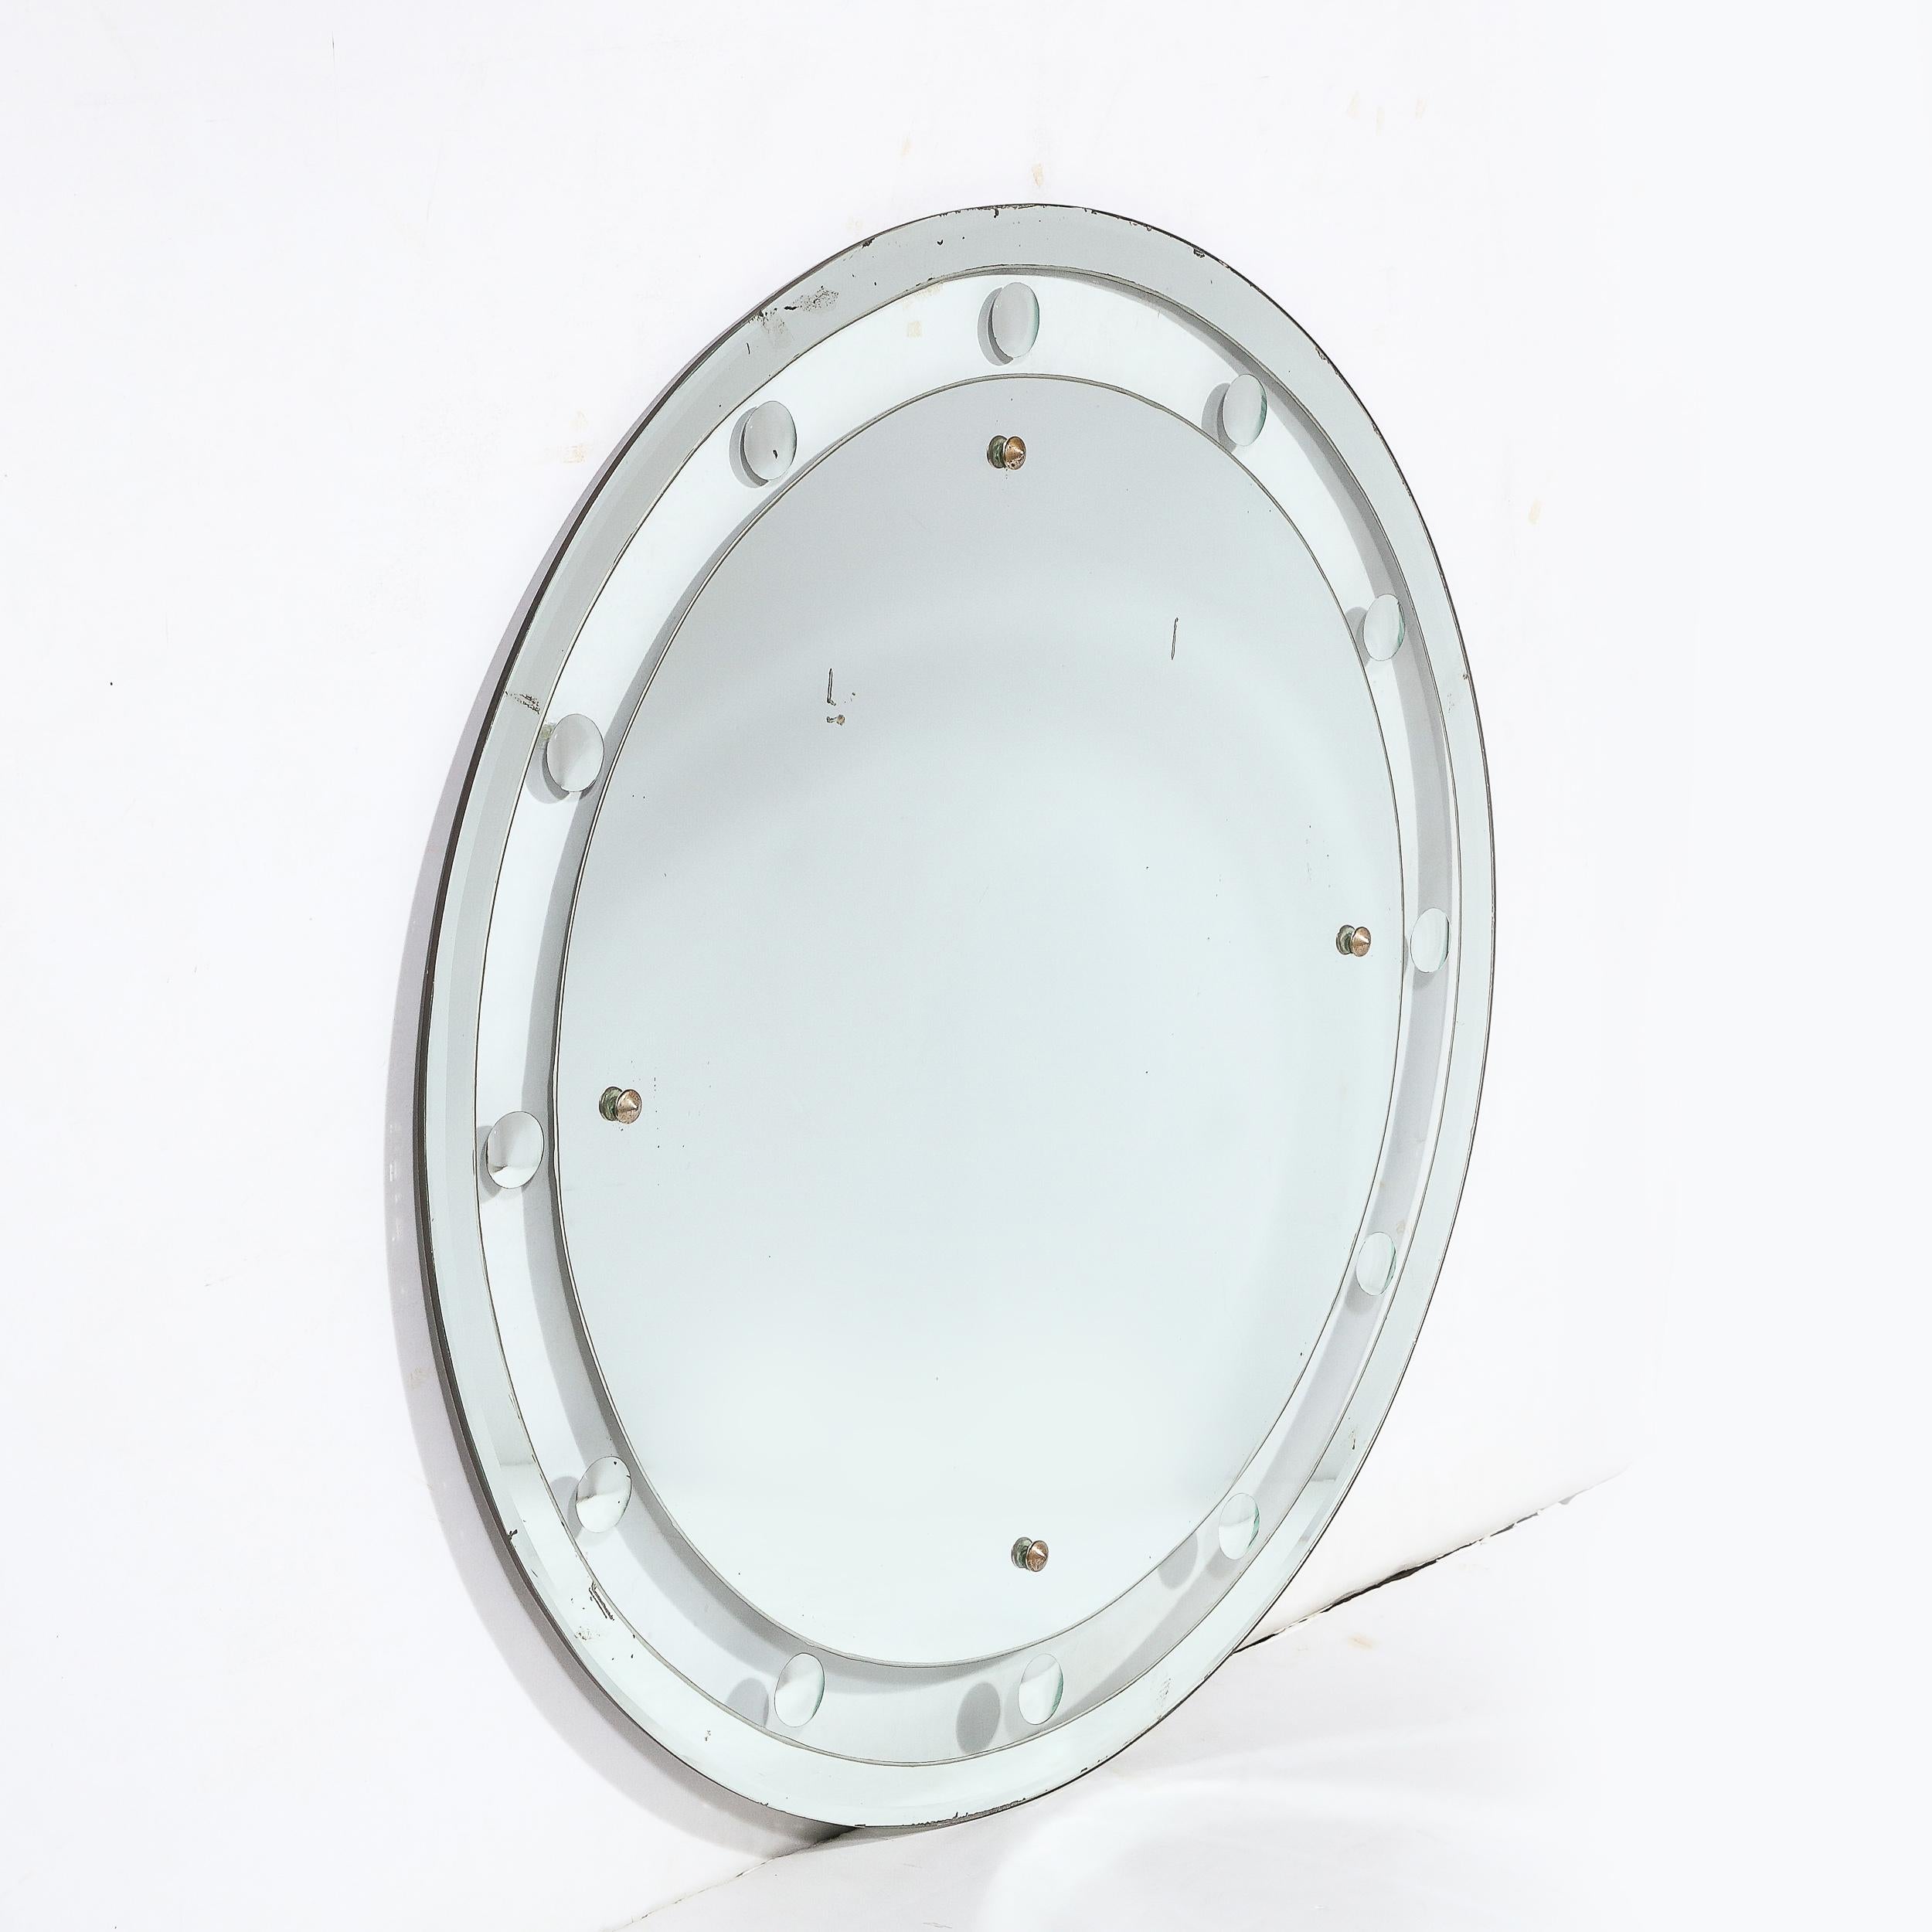 Art Deco Machine Age Floating Edge Round Banded Mirror W/ Reverse Bevel Details  For Sale 1